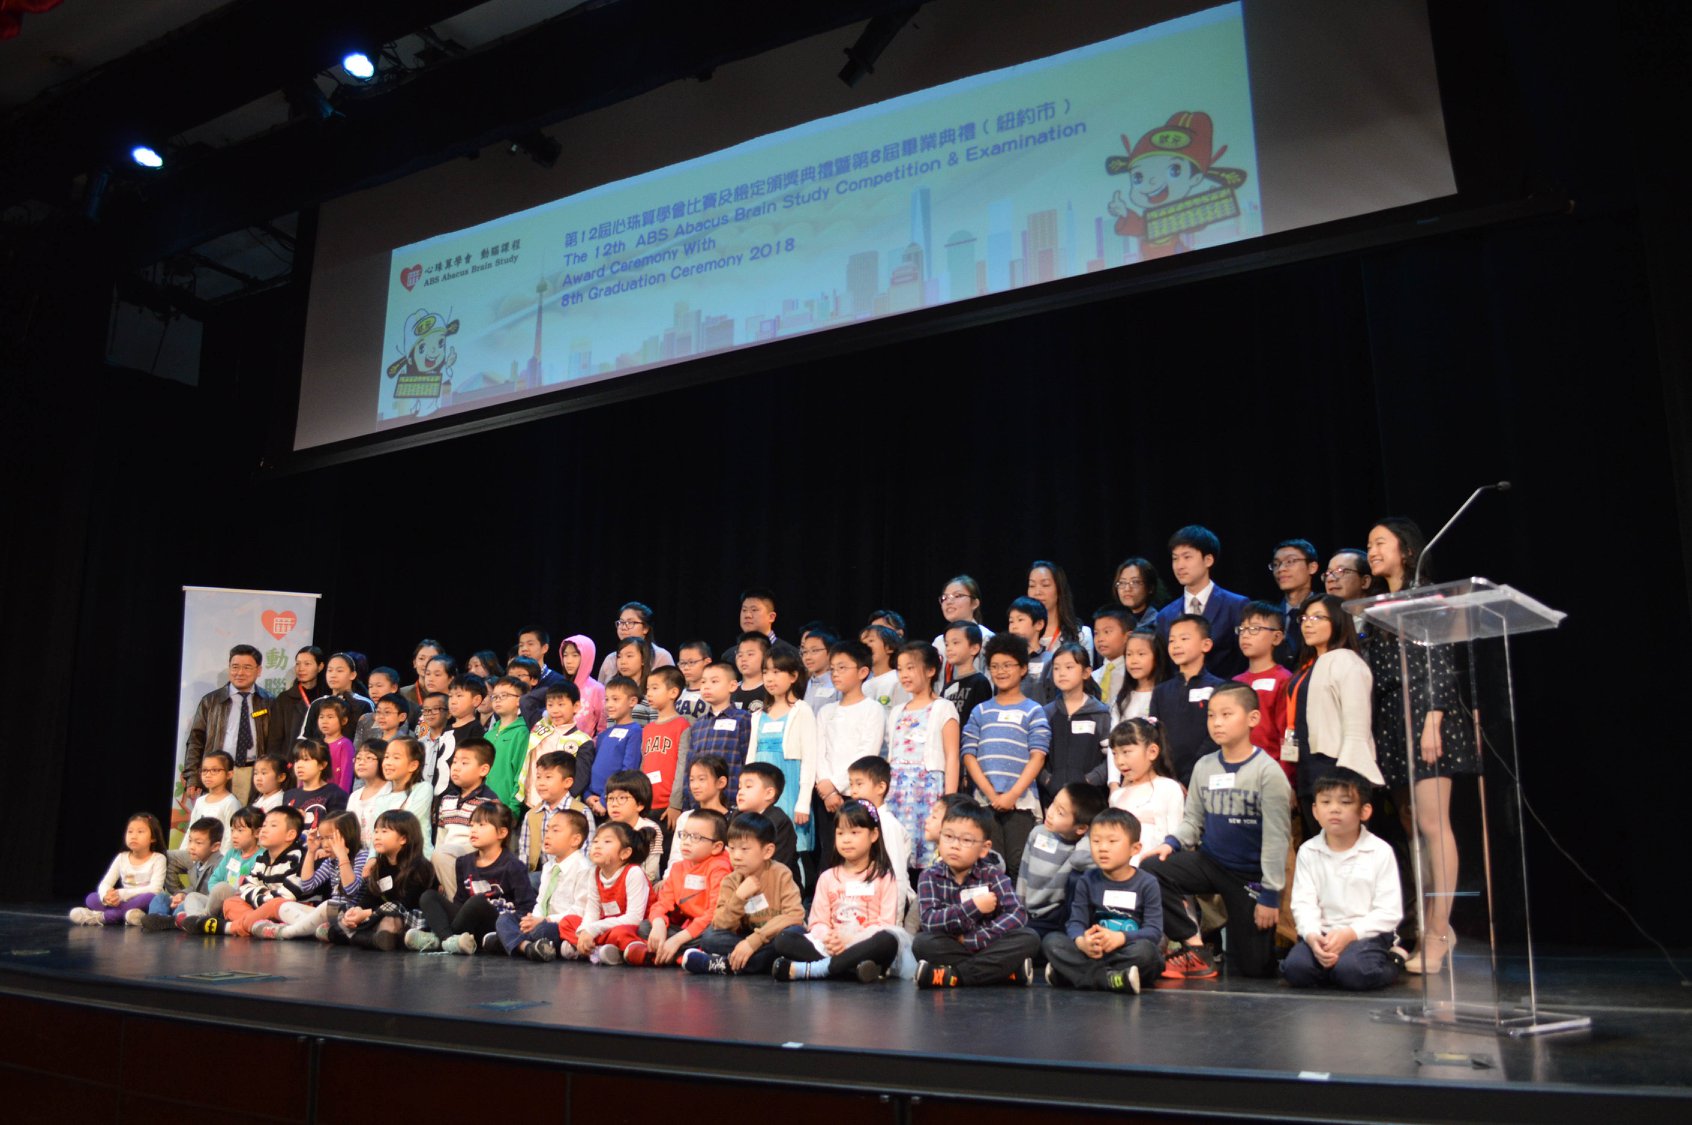 Our 12th New York City Abacus Competition (May 2018)